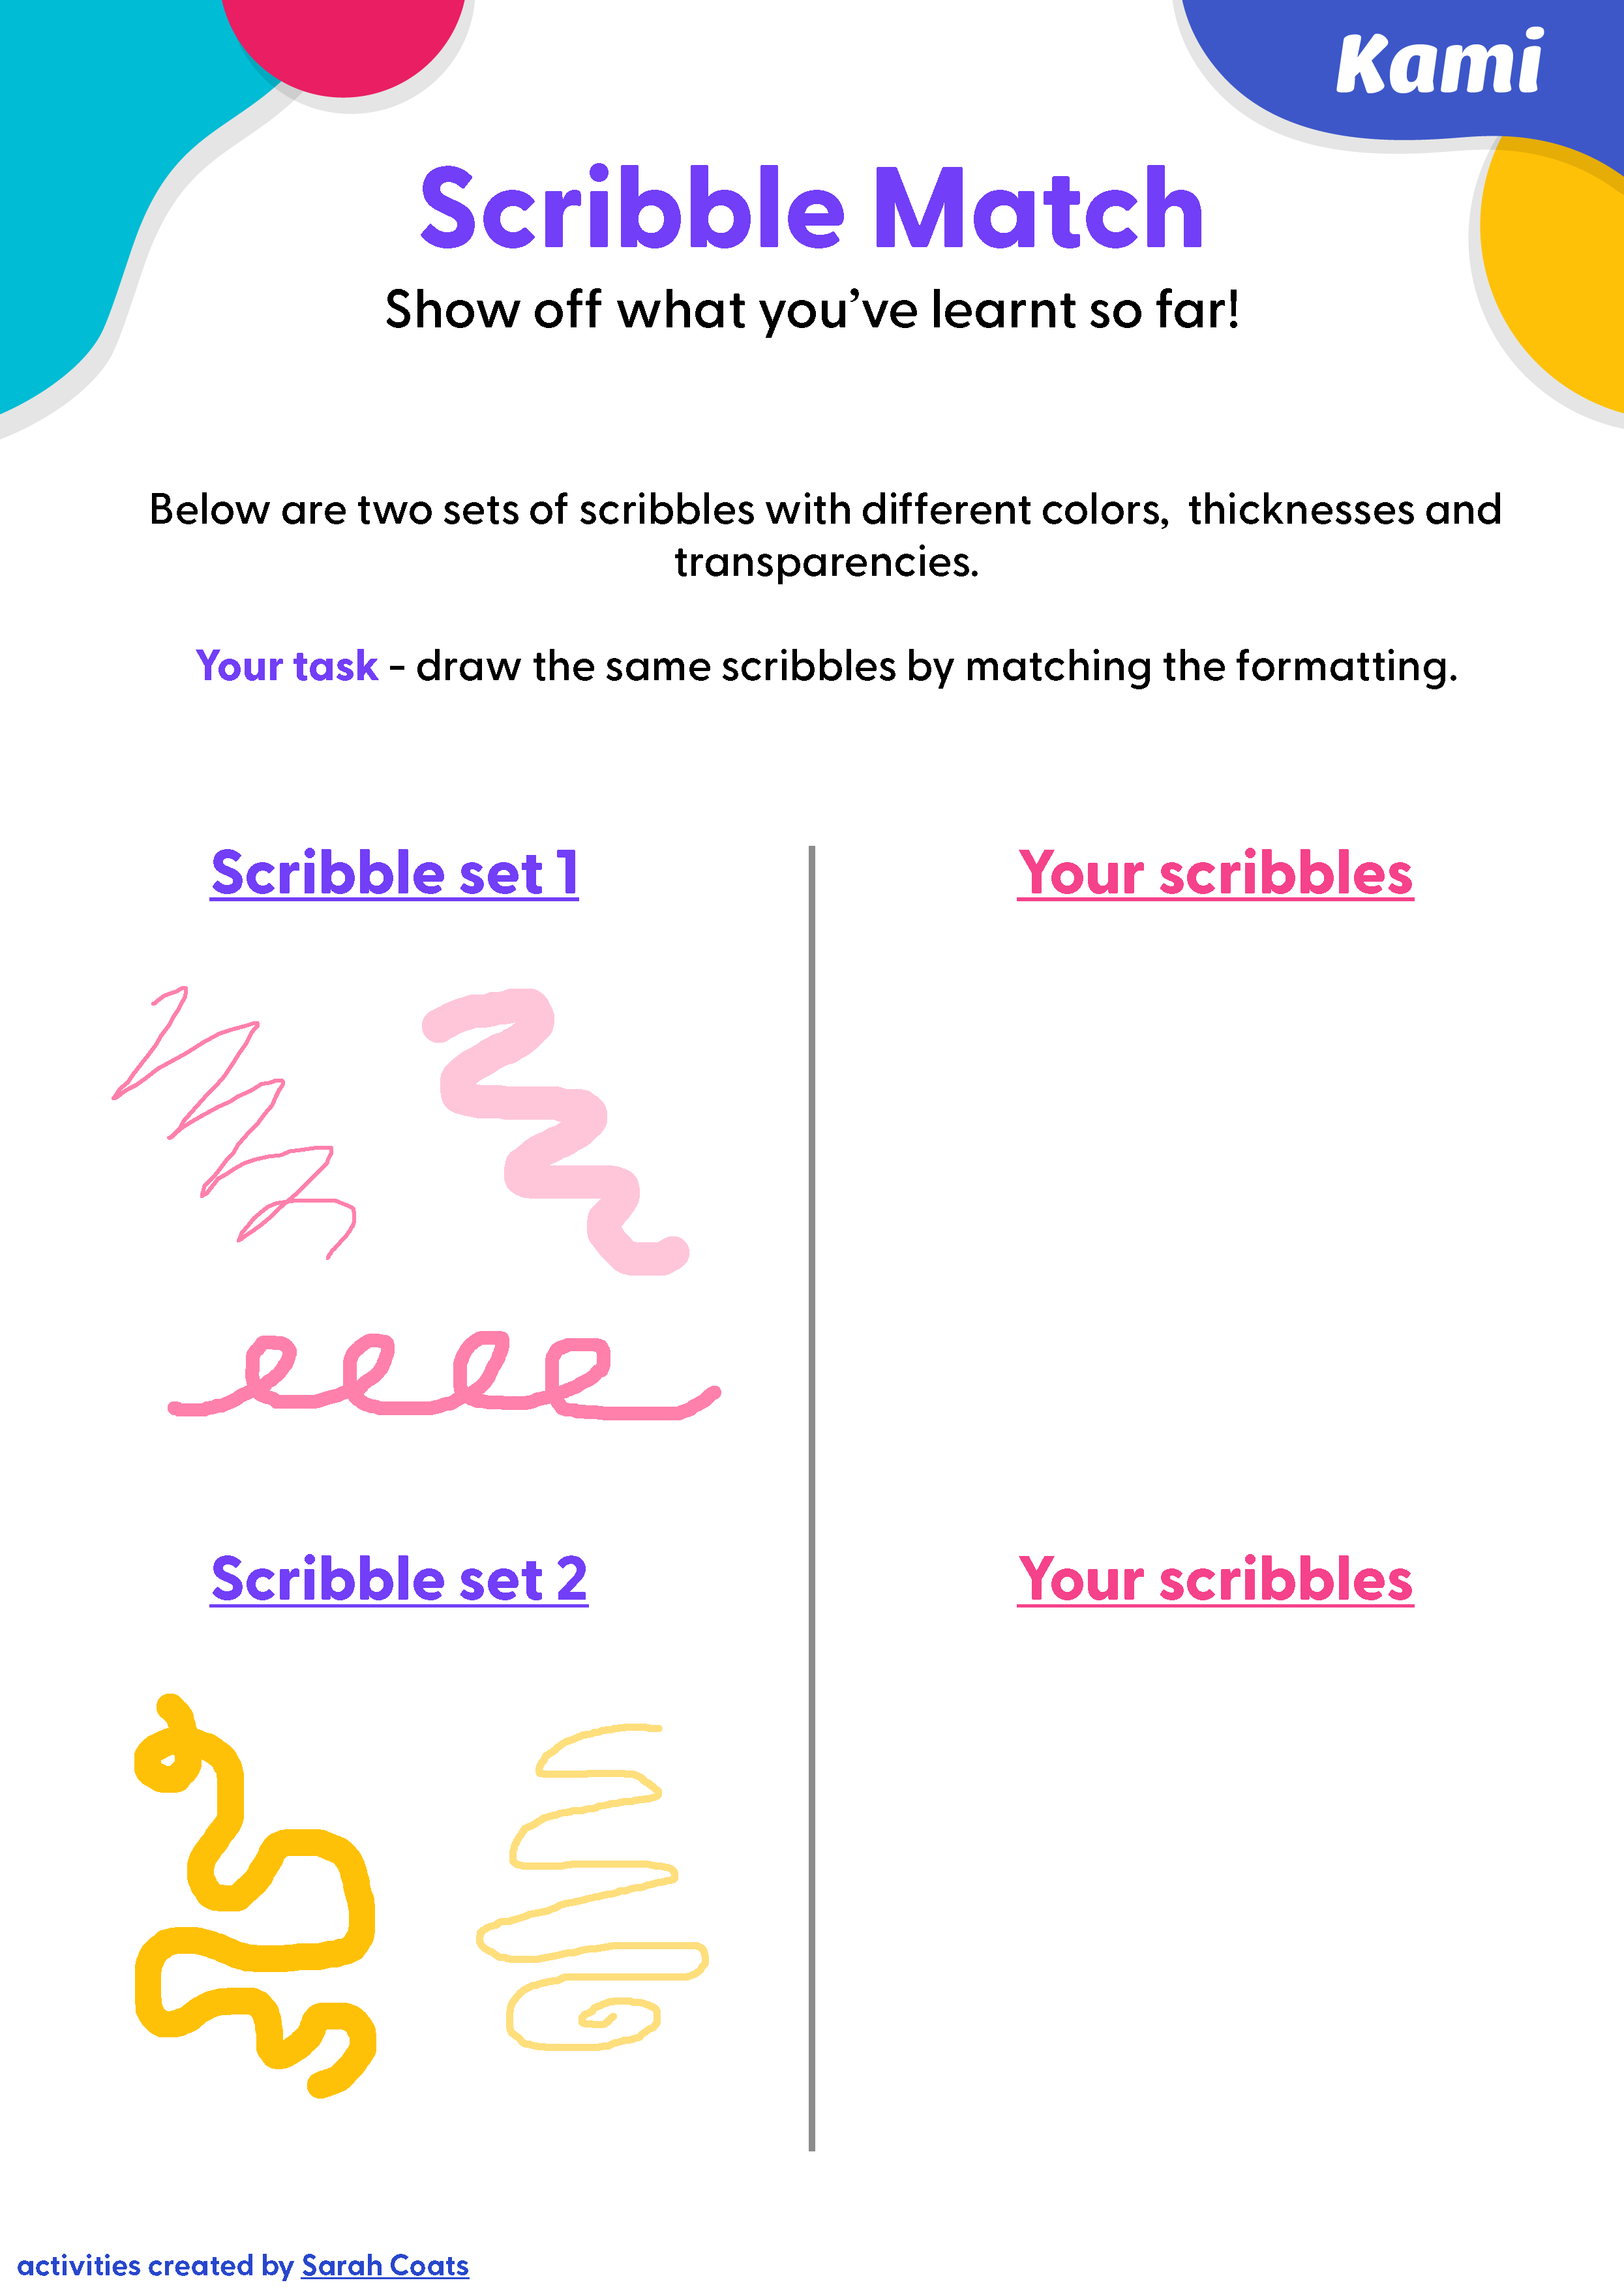 A Scribble Match for kids with a fun game